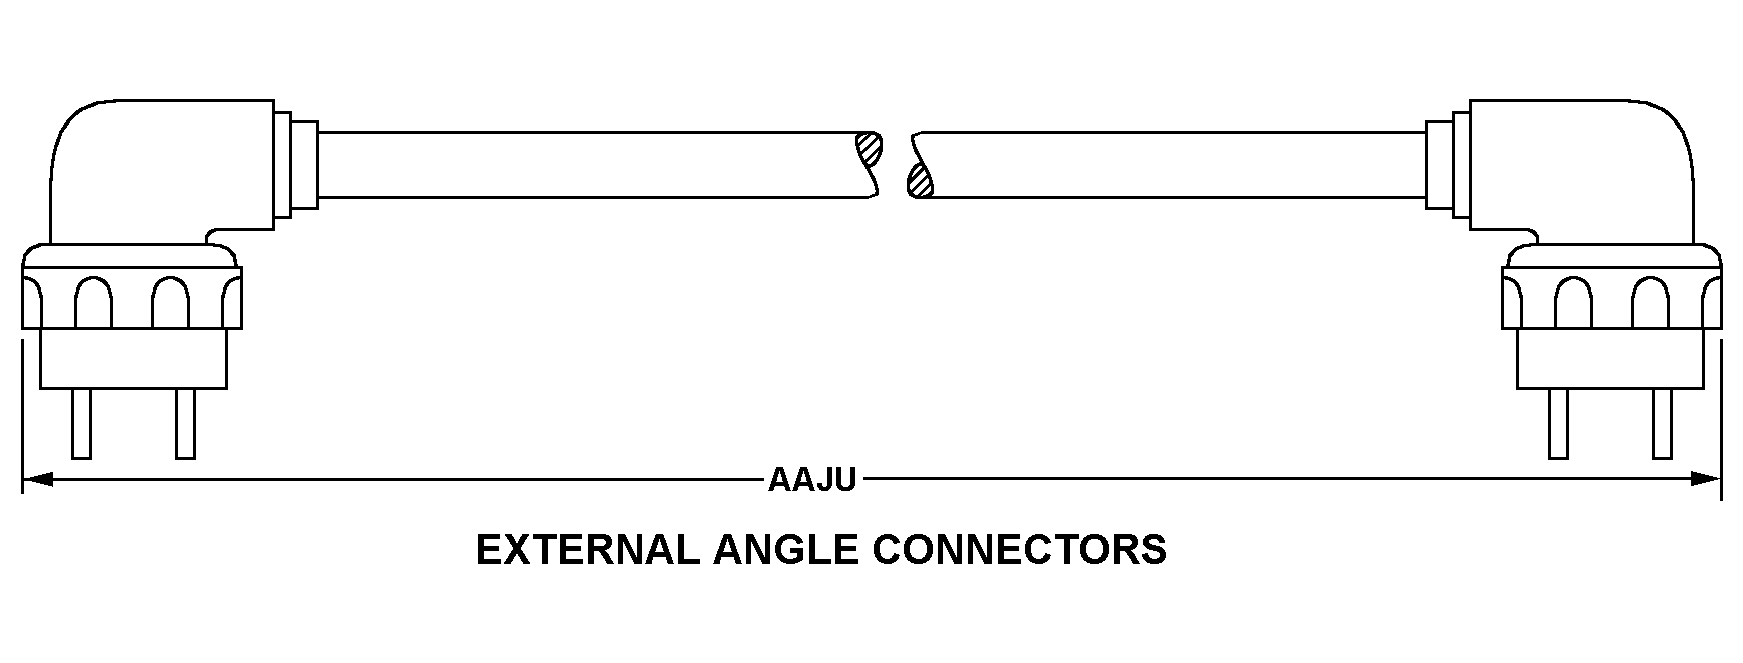 EXTERNAL ANGLE CONNECTORS style nsn 6150-01-226-6474